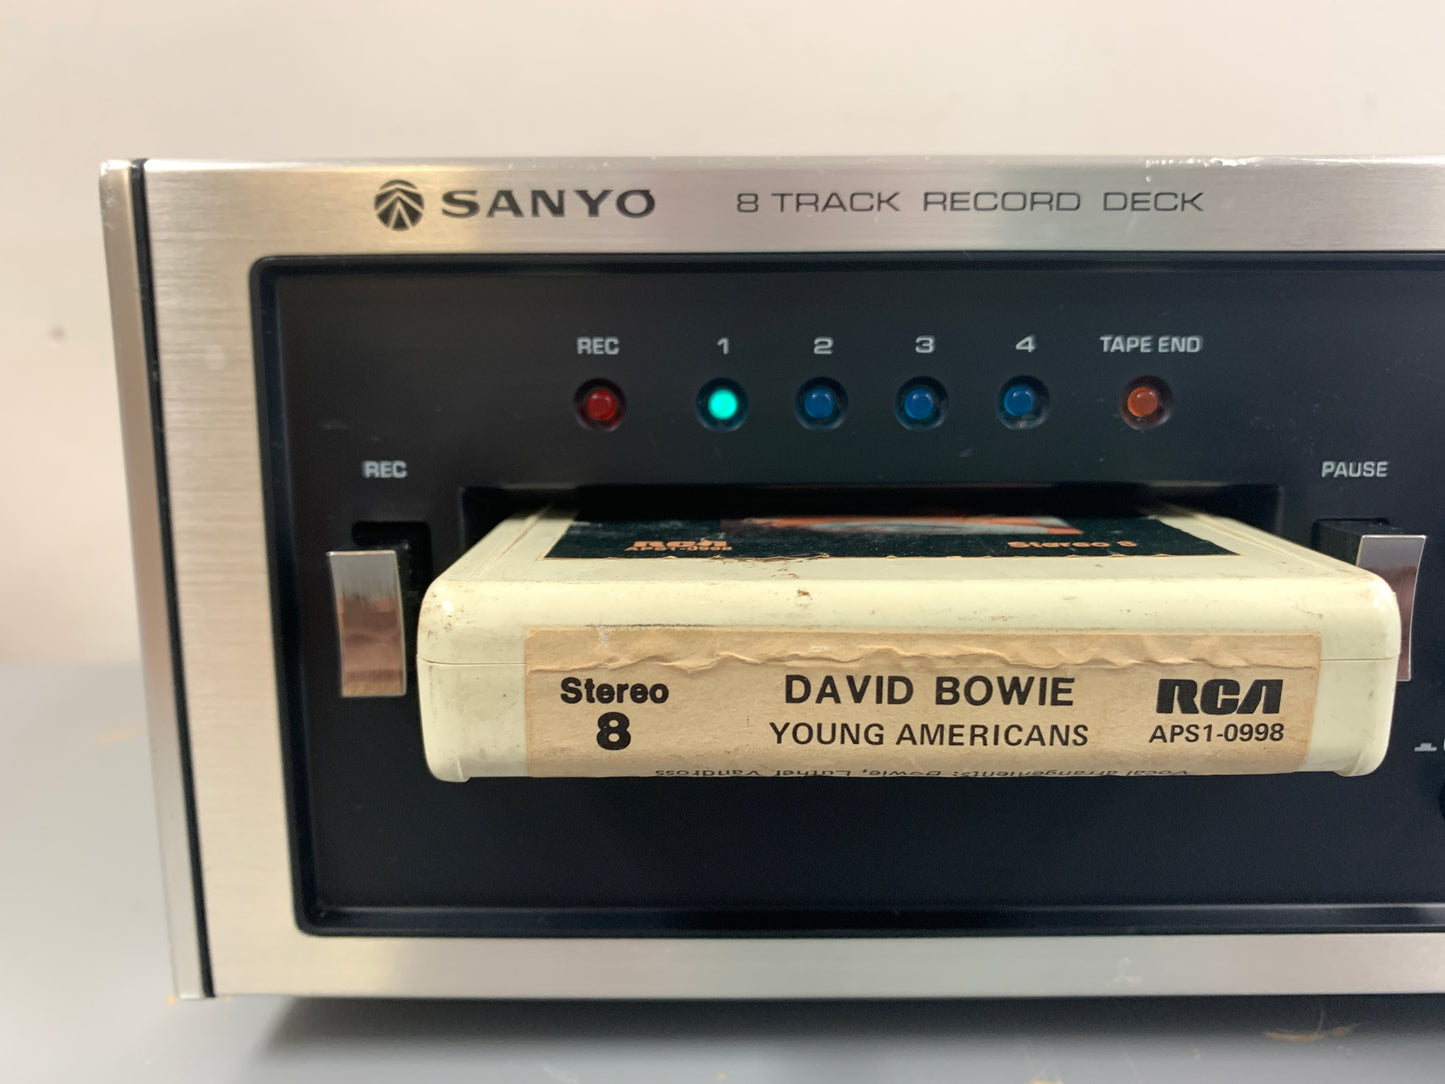 Sanyo RD-8020 Eight Track Player and Recorder * Right VU Meter is not working